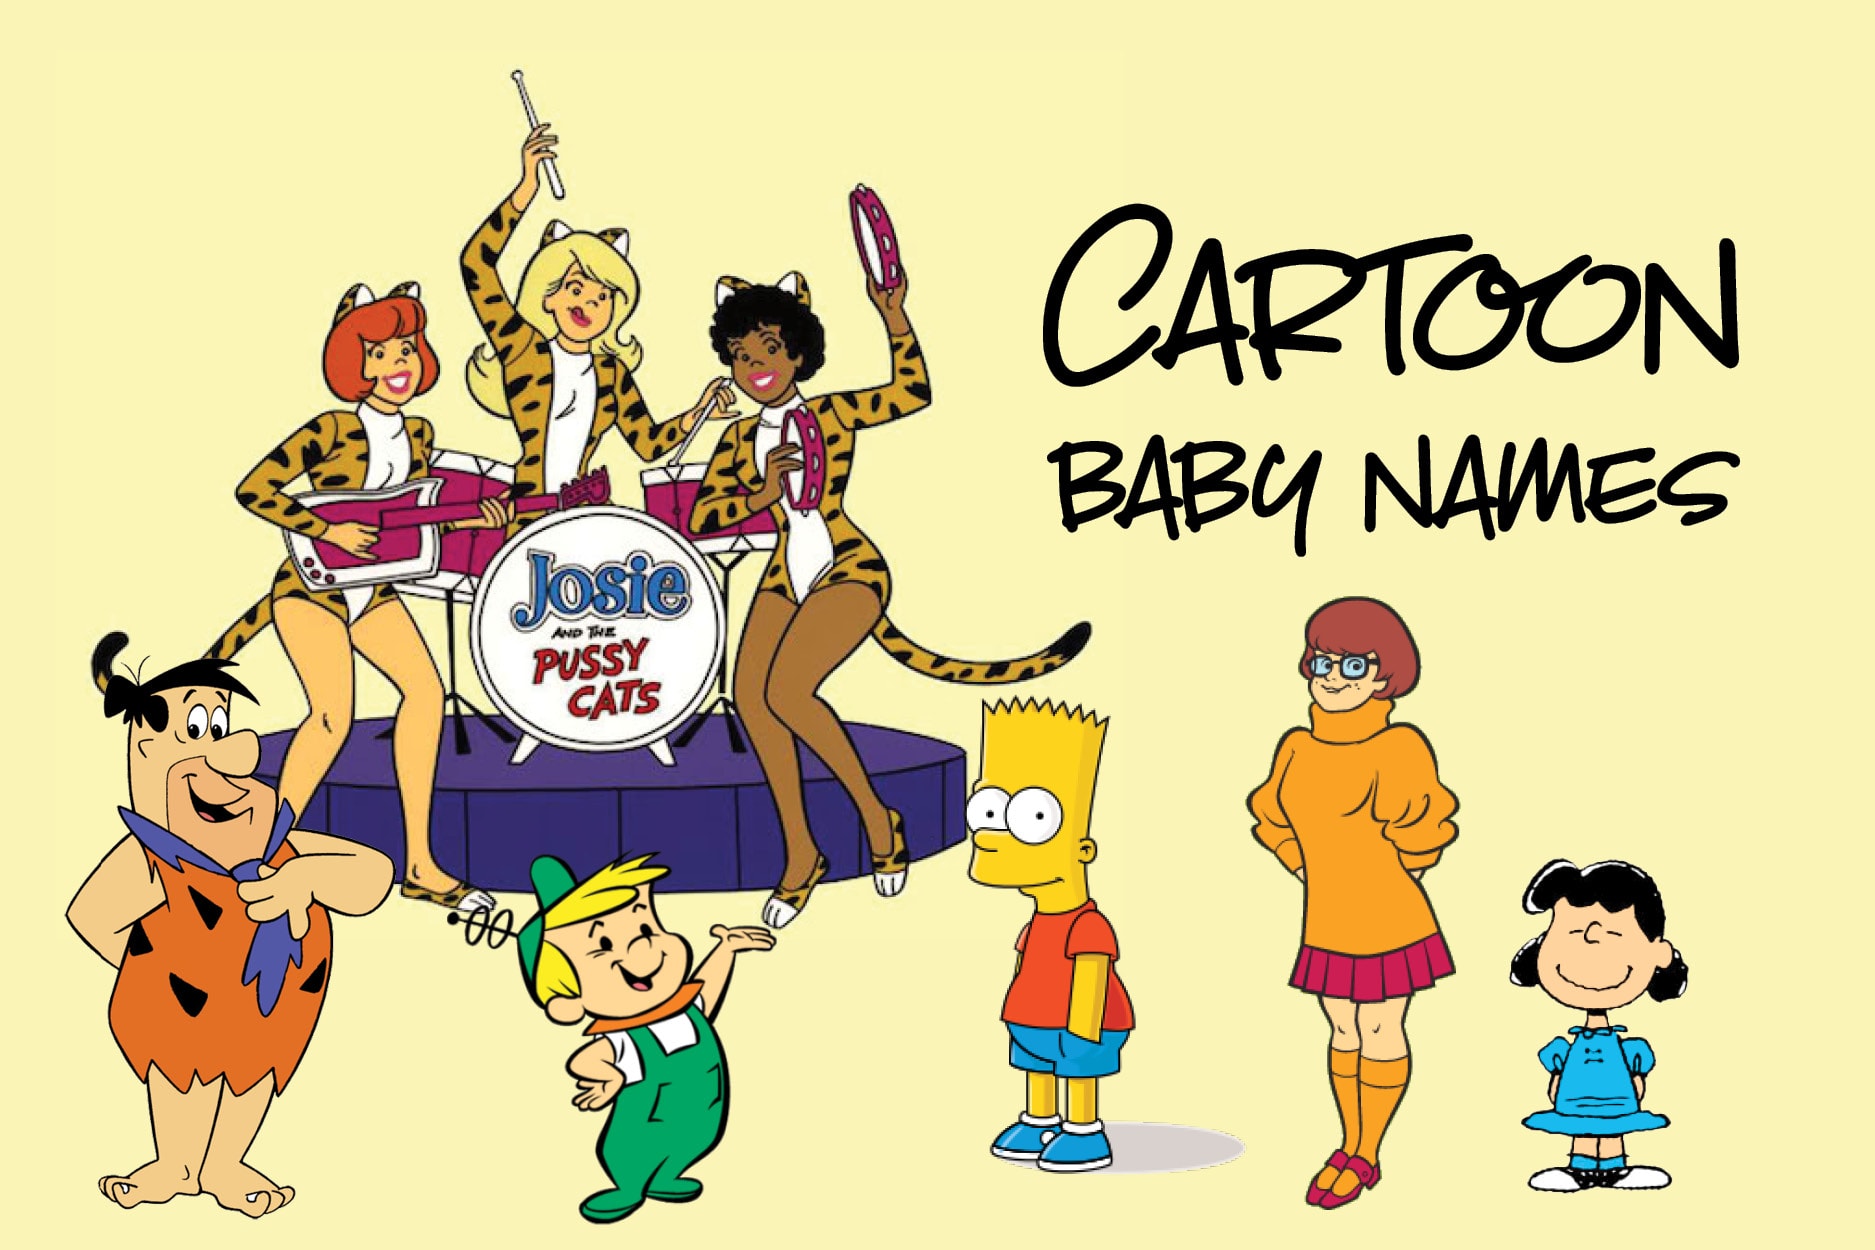 Cartoon-inspired baby names - Name meaning, origin, variations and more